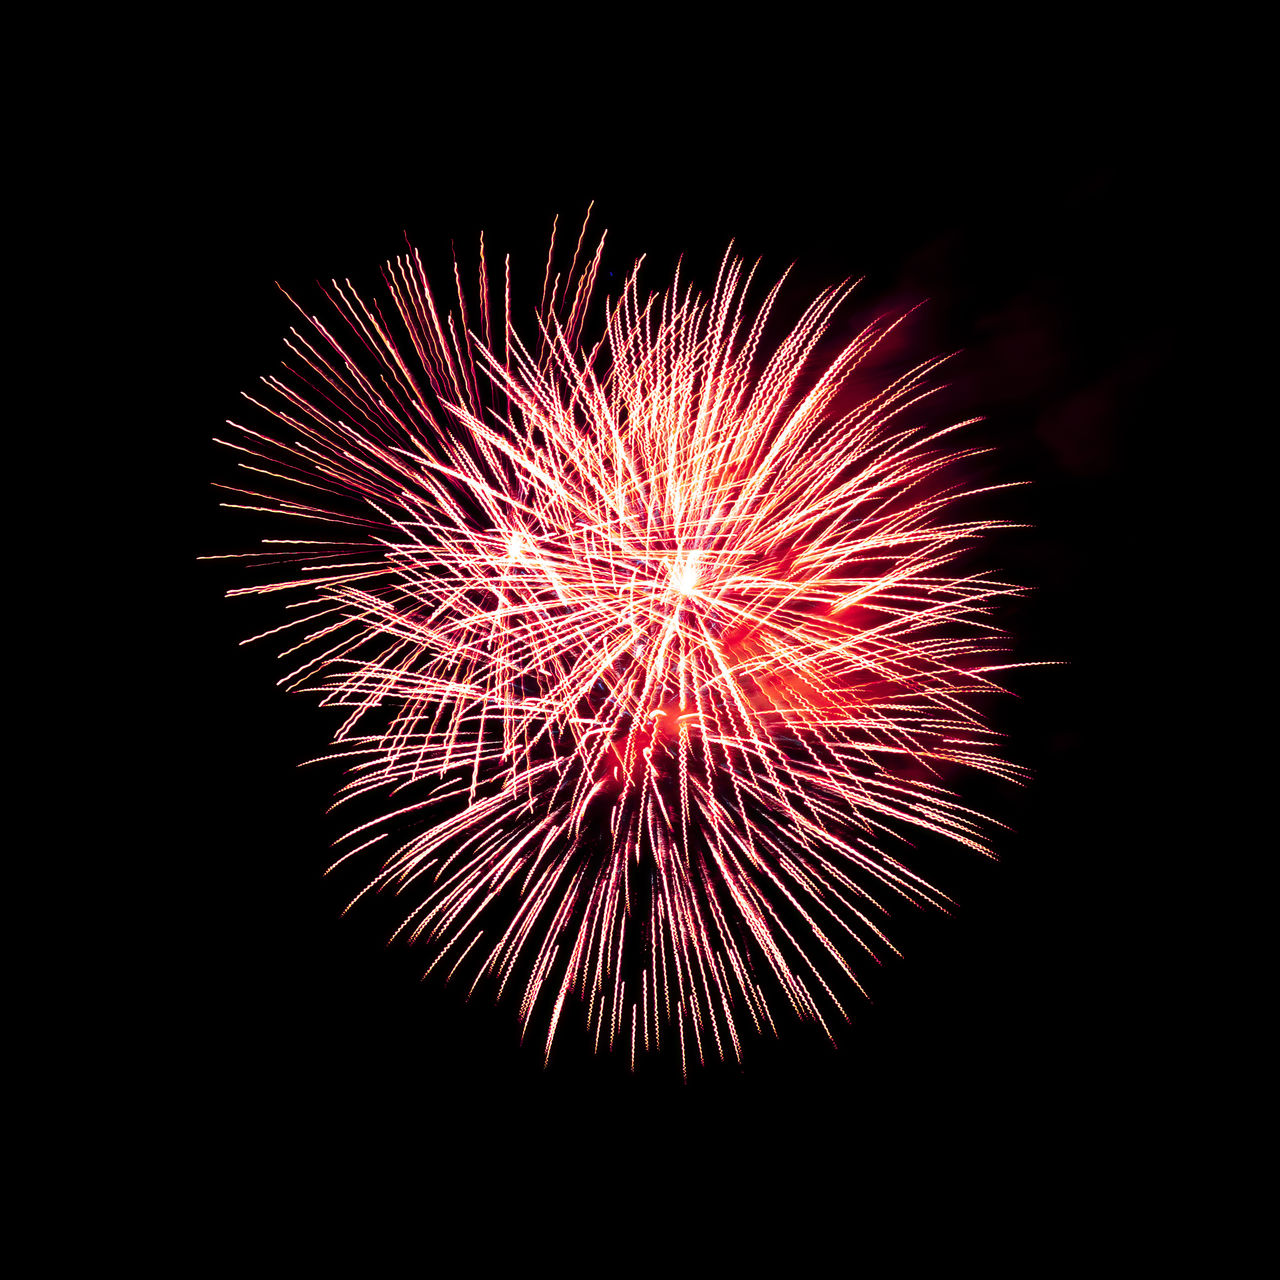 fireworks, celebration, motion, firework display, event, night, exploding, illuminated, arts culture and entertainment, recreation, no people, glowing, sky, nature, firework - man made object, blurred motion, long exposure, low angle view, multi colored, copy space, black background, outdoors, red, dark